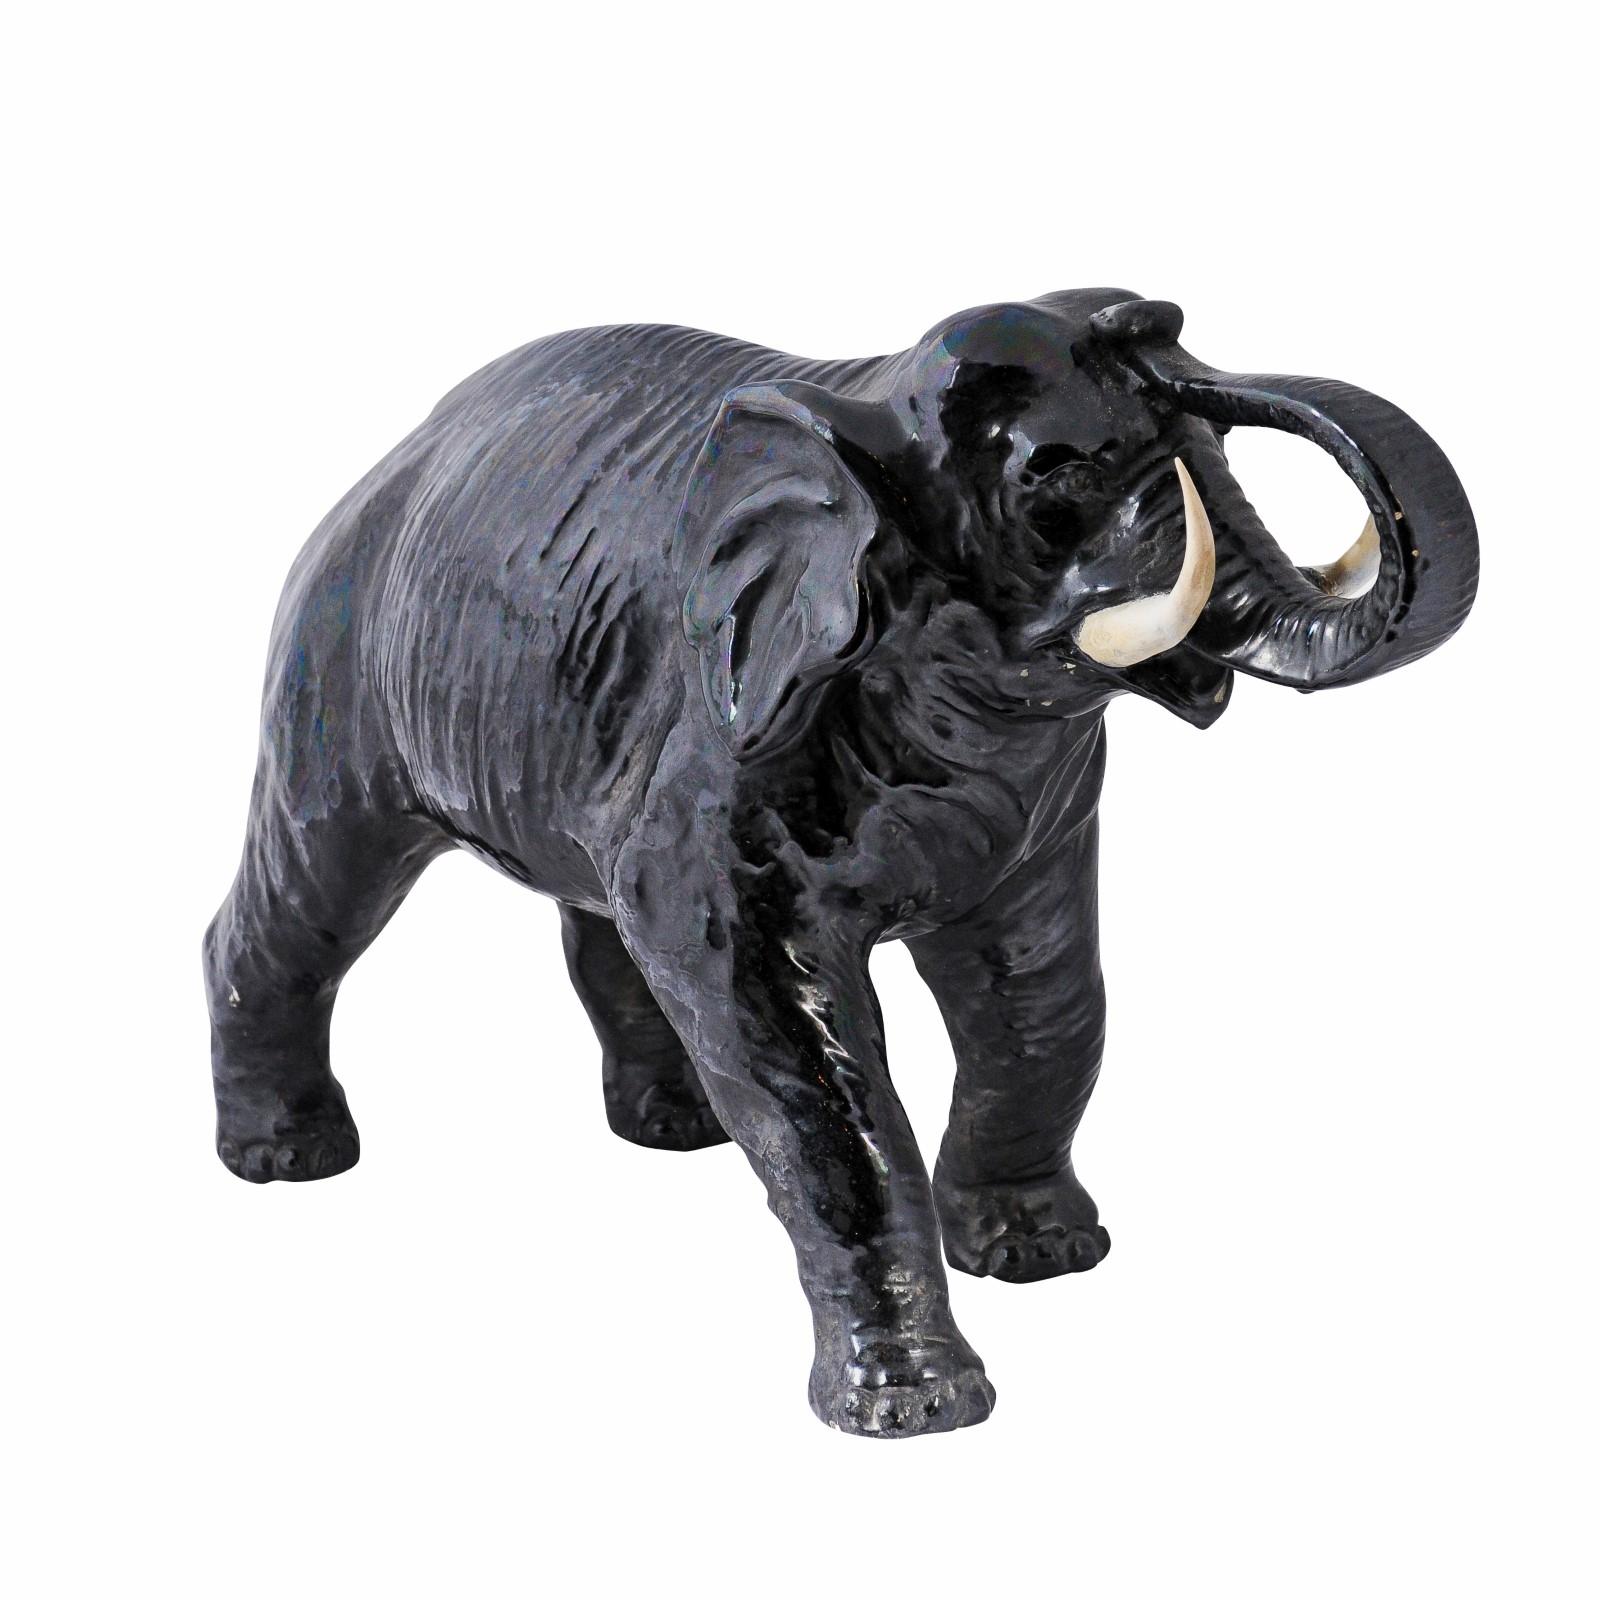 An Italian black glazed ceramic walking elephant from the 20th century with trunk up and glossy finish. Discover a blend of style and symbolism with this Italian black glazed ceramic elephant from the 20th century. This striking piece of art exudes